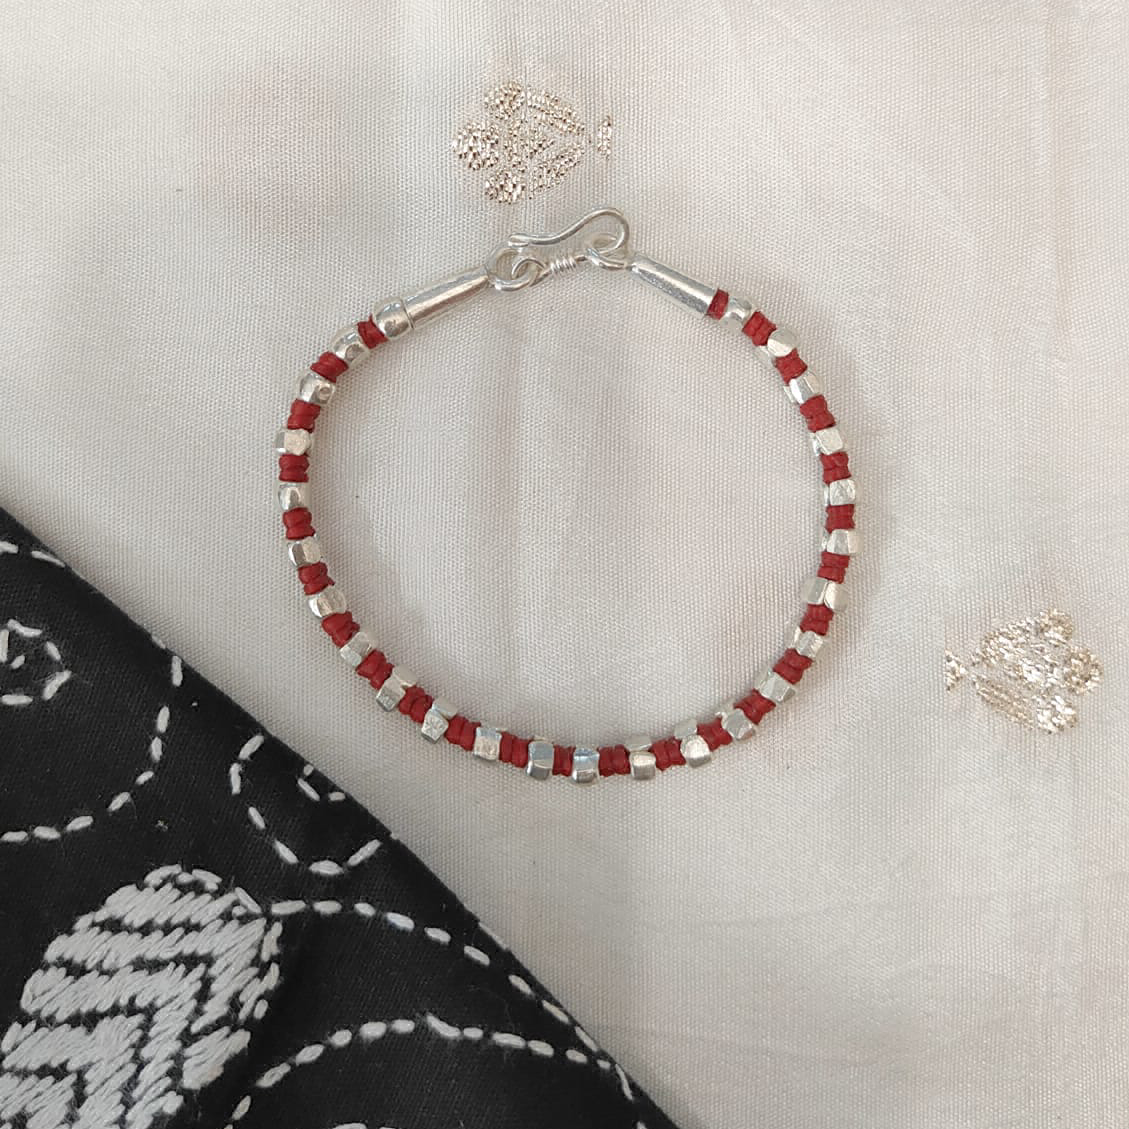 Aanya Alternating Bracelets in Red Thread and Silver beads